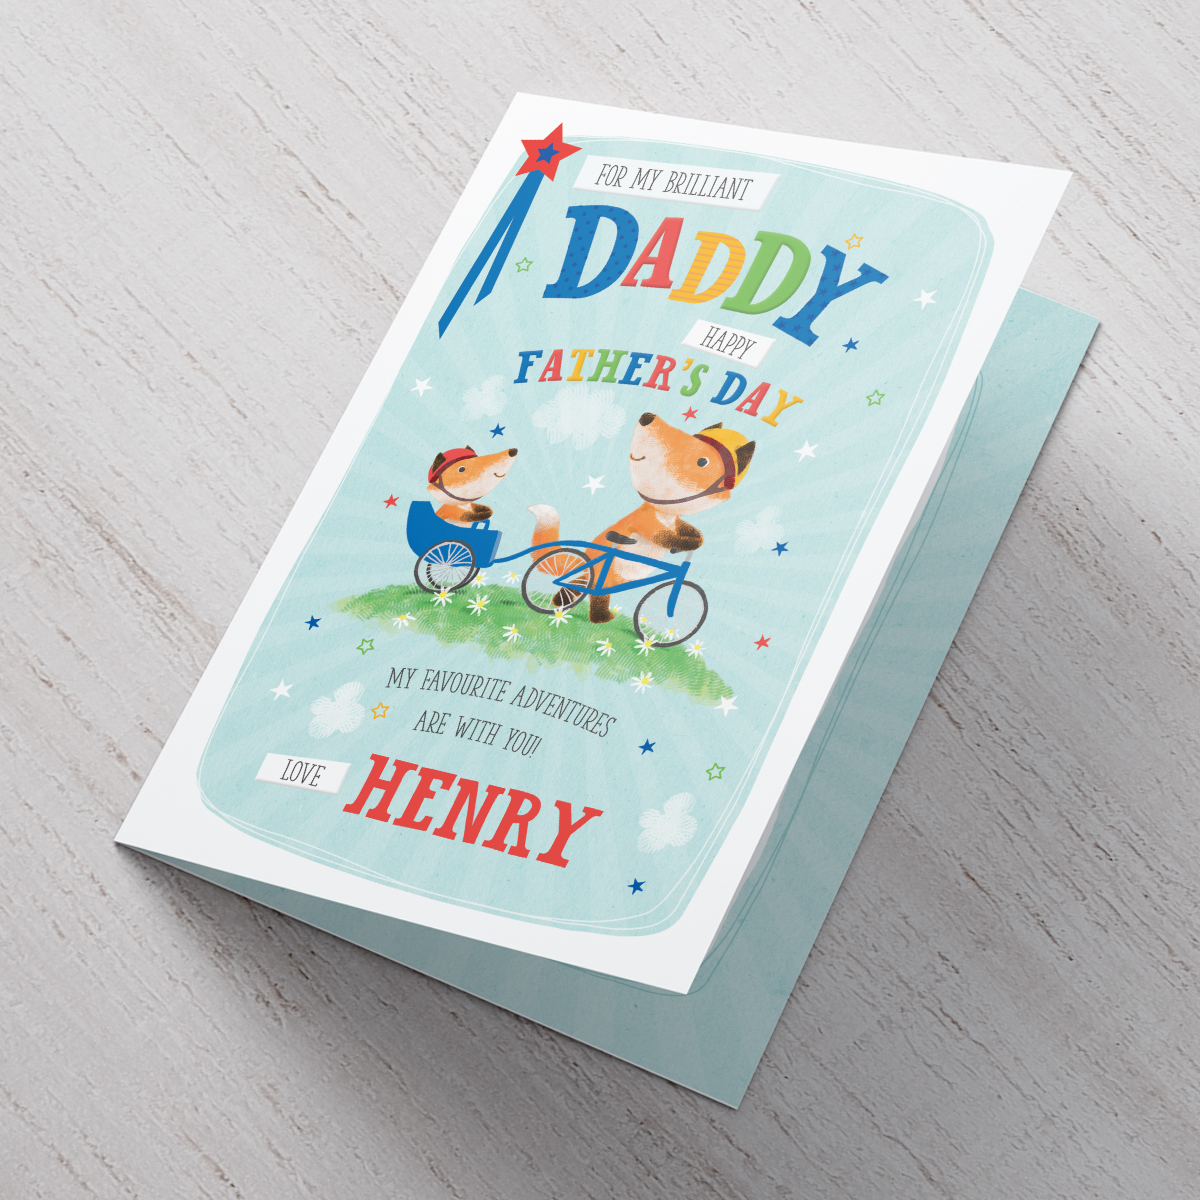 Personalised Father's Day Card - Brilliant Daddy